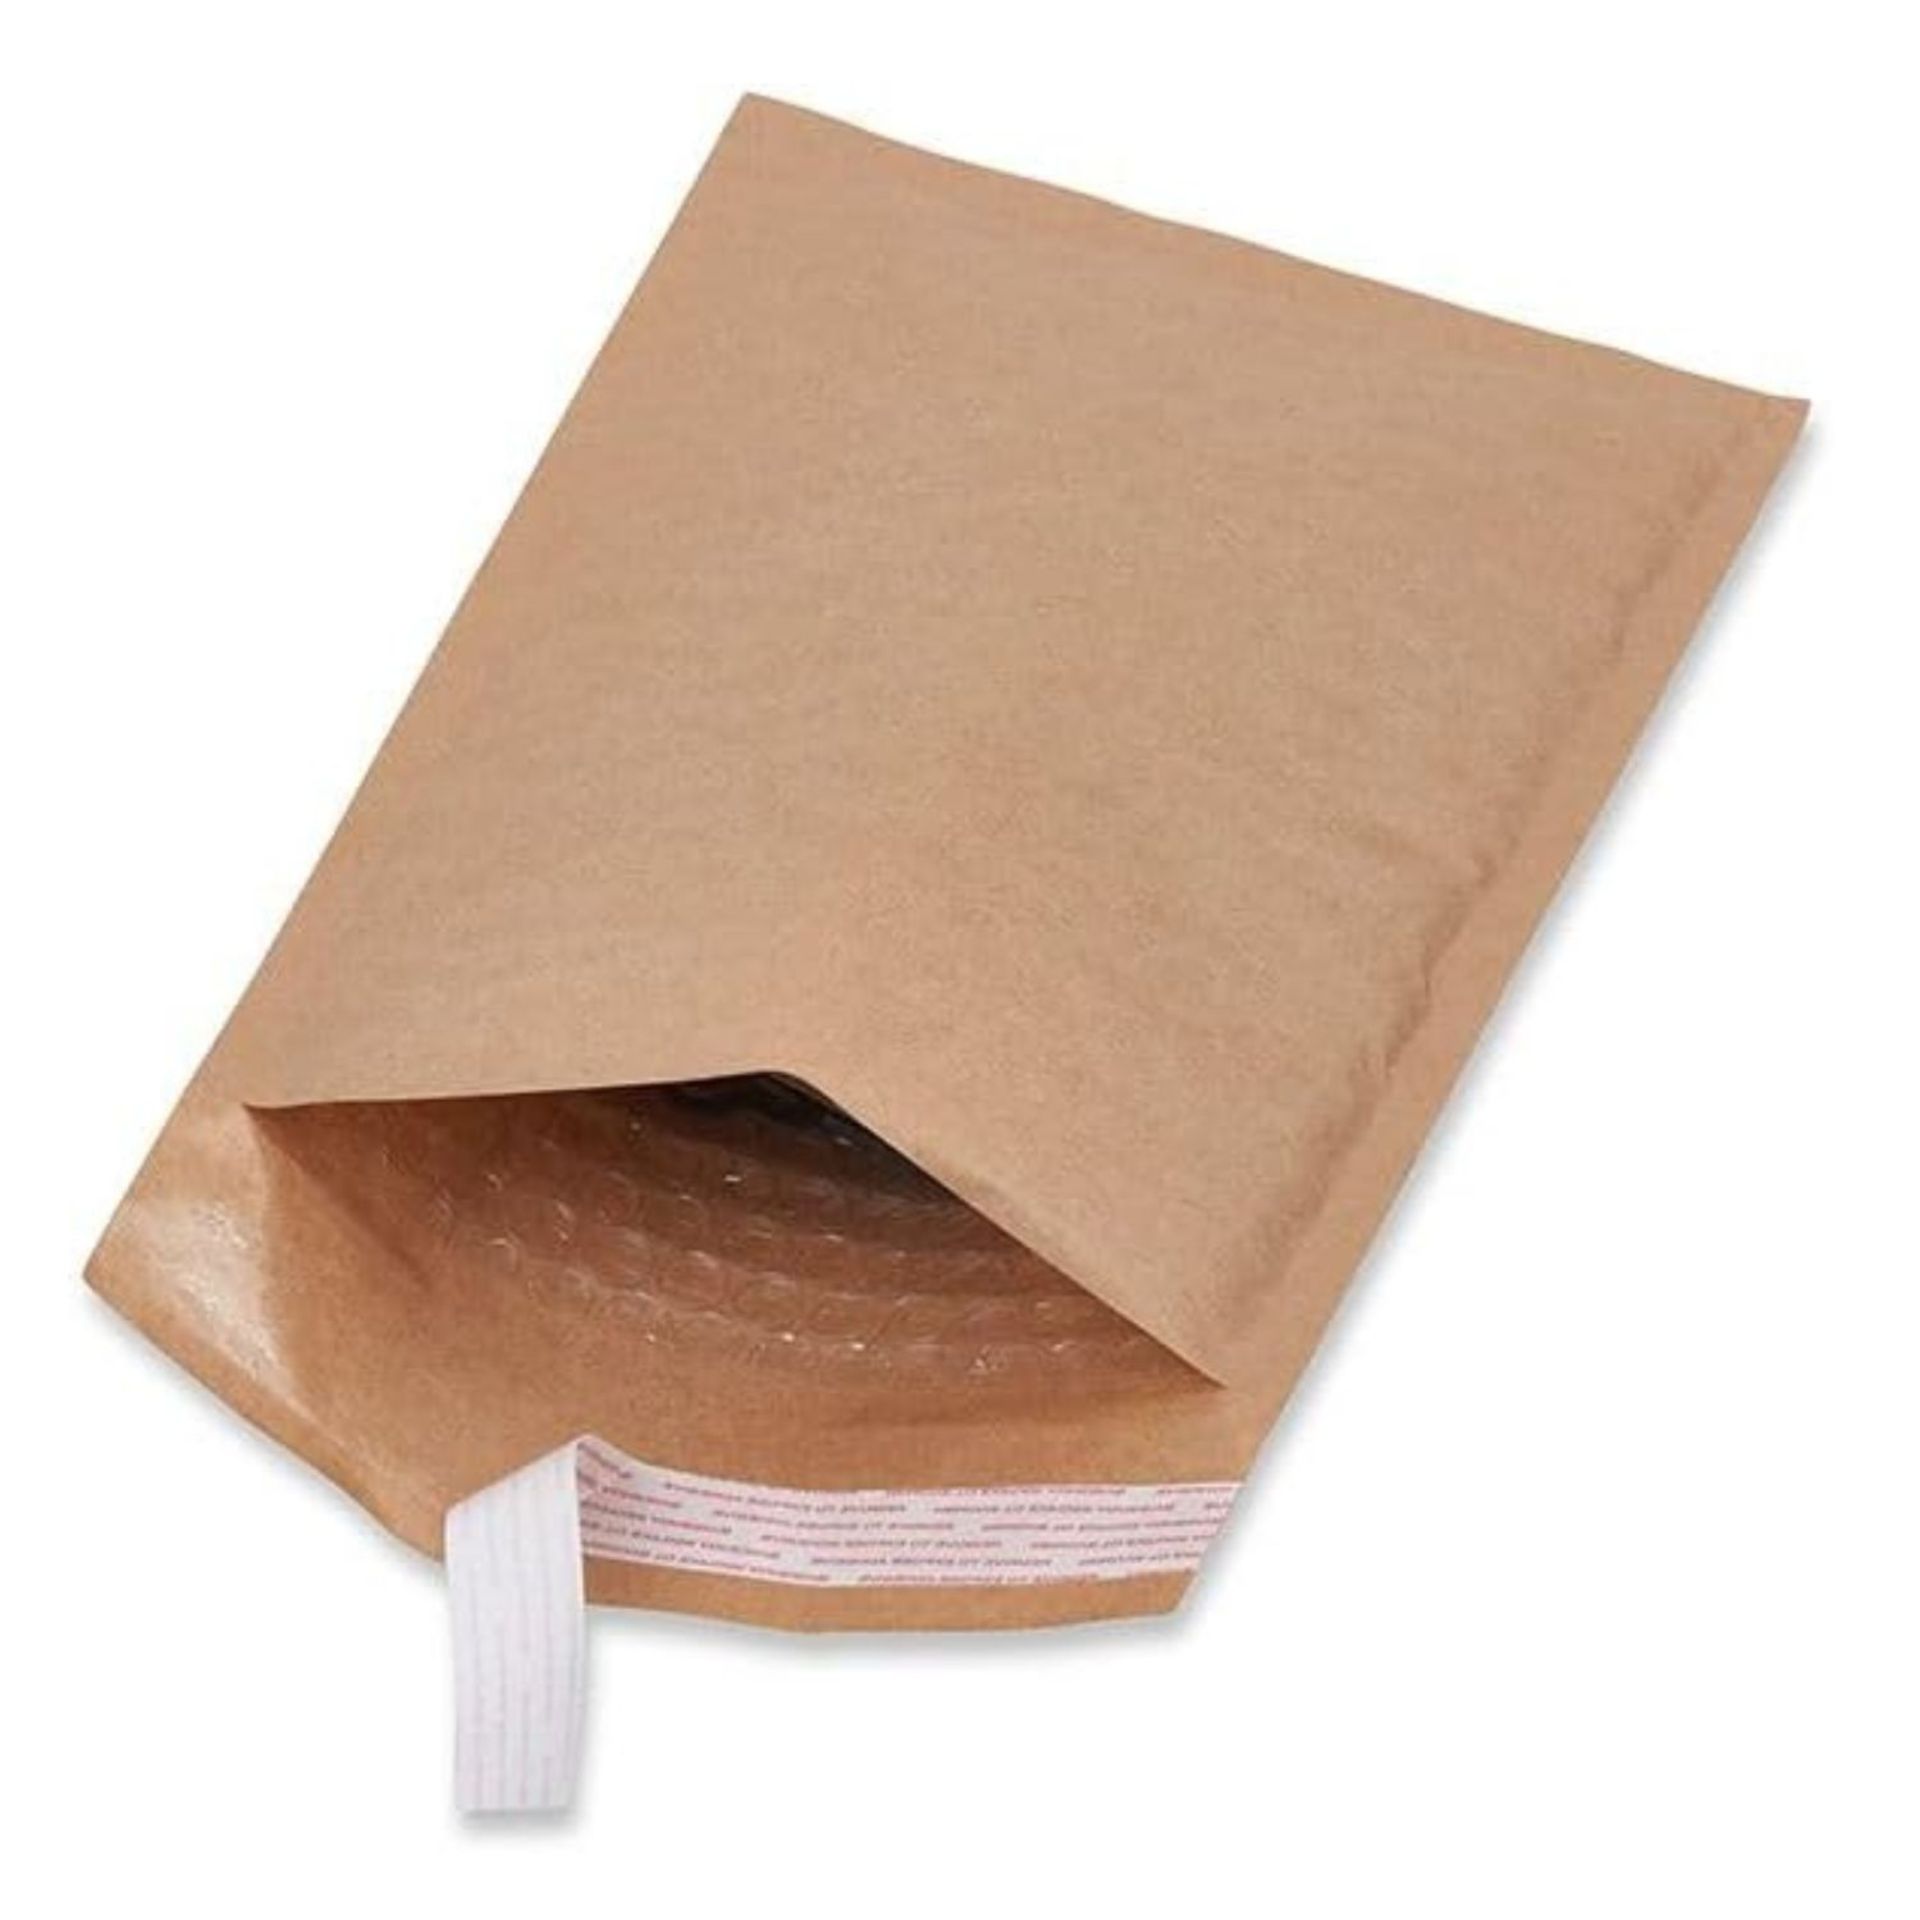 1000 BUBBLE ENVELOPES WITH PEEL AND SEAL TOUGH LIGHT PADDED (140 X 210MM) - Image 2 of 4